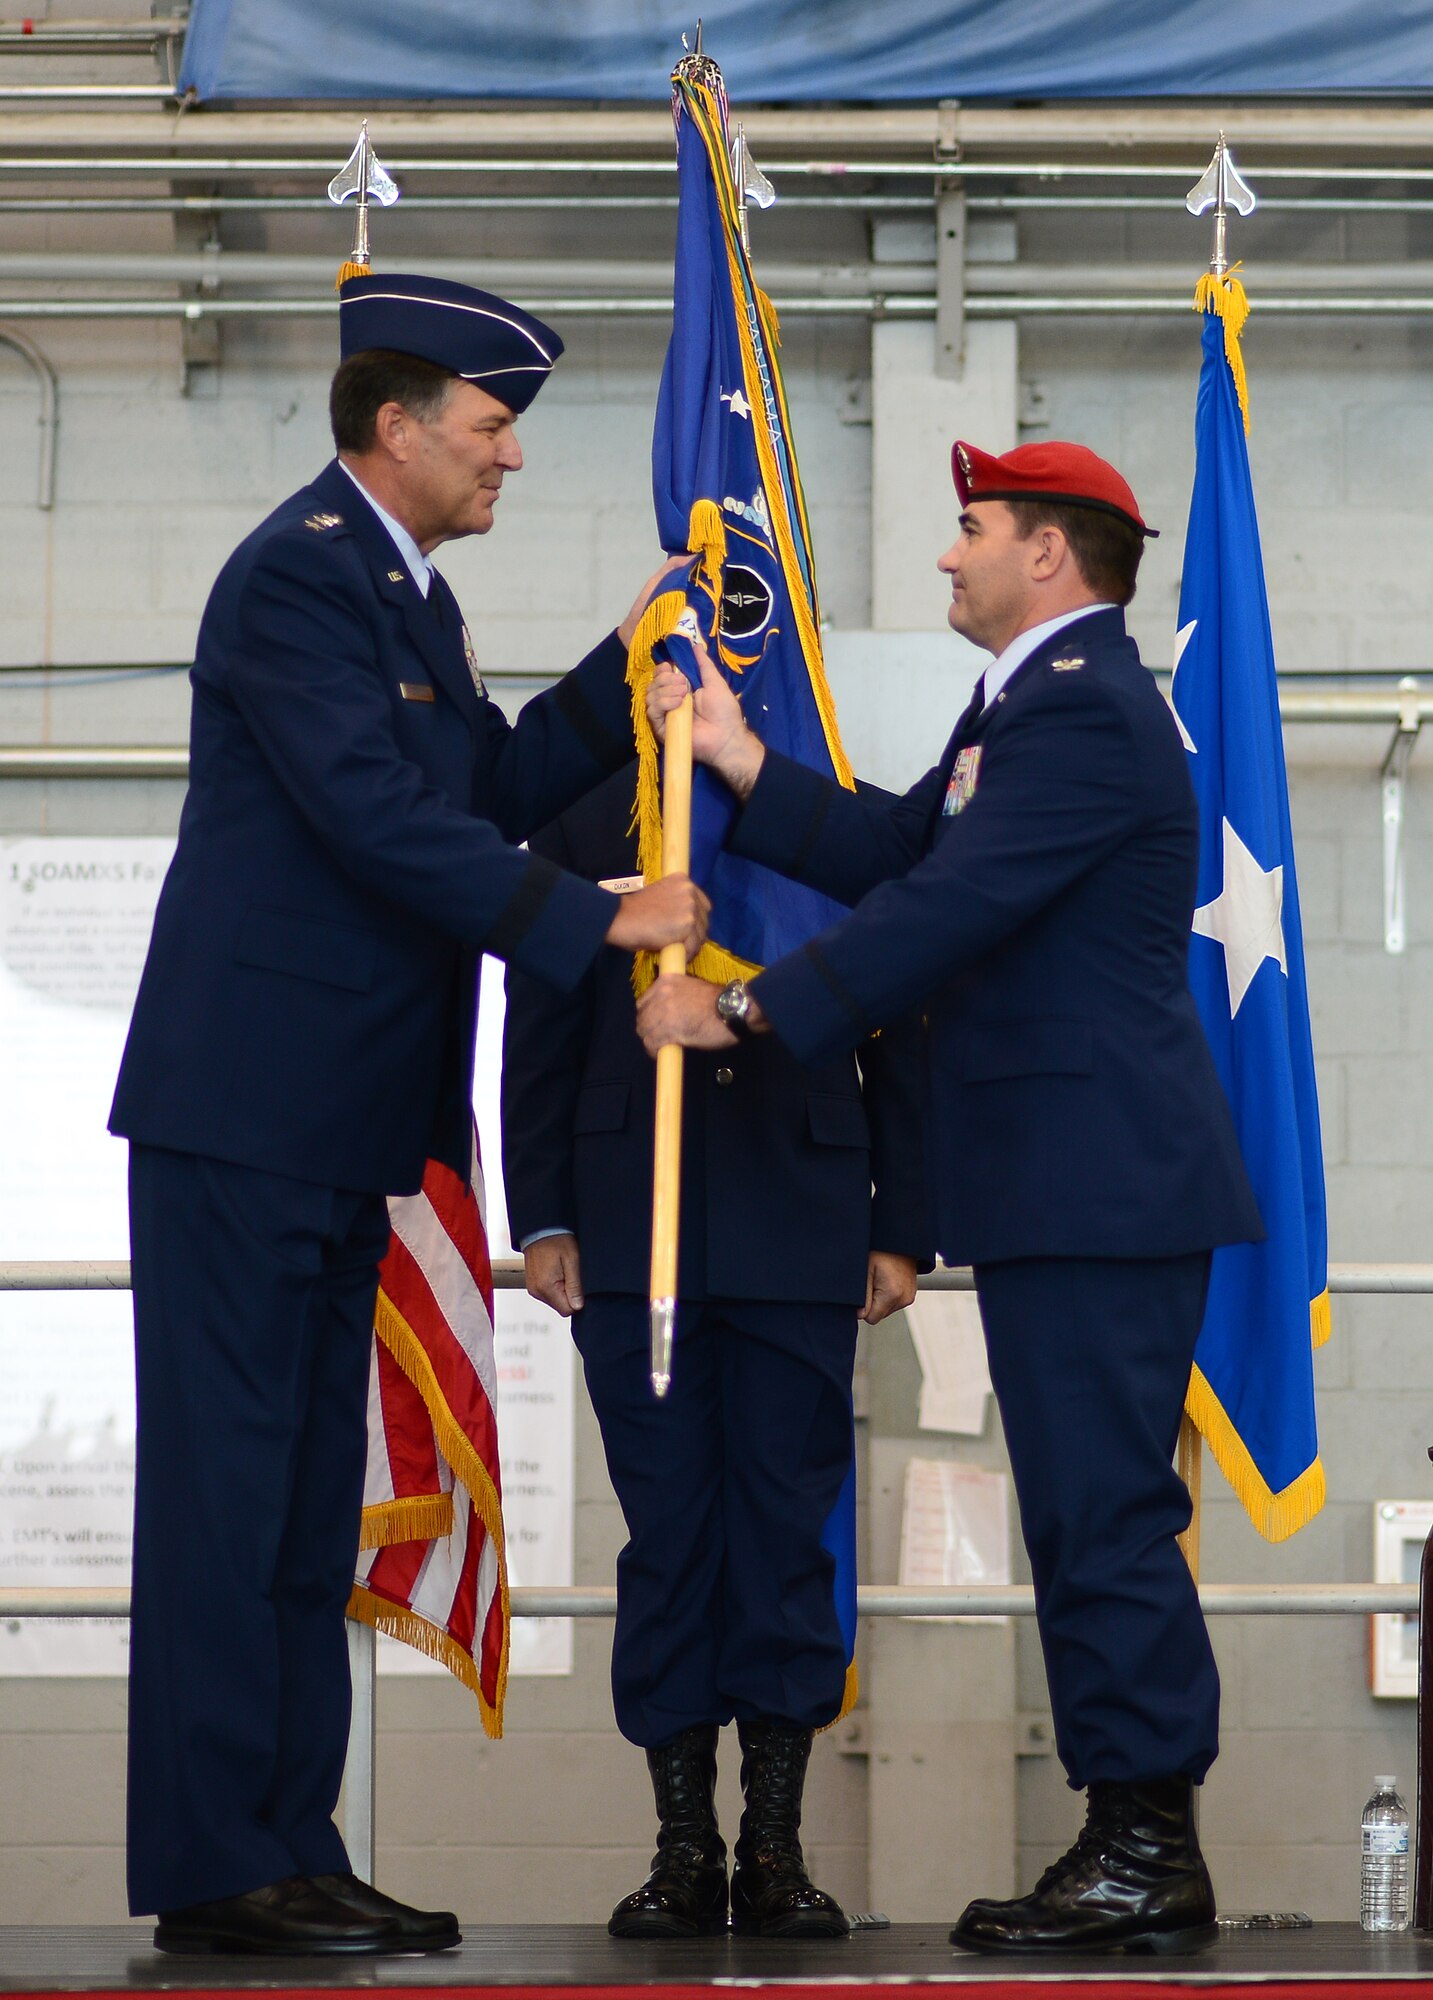 Lt. Gen. Bradley Heithold, Air Force Special Operations Command commander hands the 24th Special Operations Wing guidon to Col. Matthew "Wolfe" Davidson, 24th SOW commander, at the Commando Hangar, Hurlburt Field, Fla., 
Sept. 19, 2014. This is Davidson's fifth command position, and he is responsible for preparing more than 1,500 special tactics Airmen for rapid global employment to enable airpower success. 
